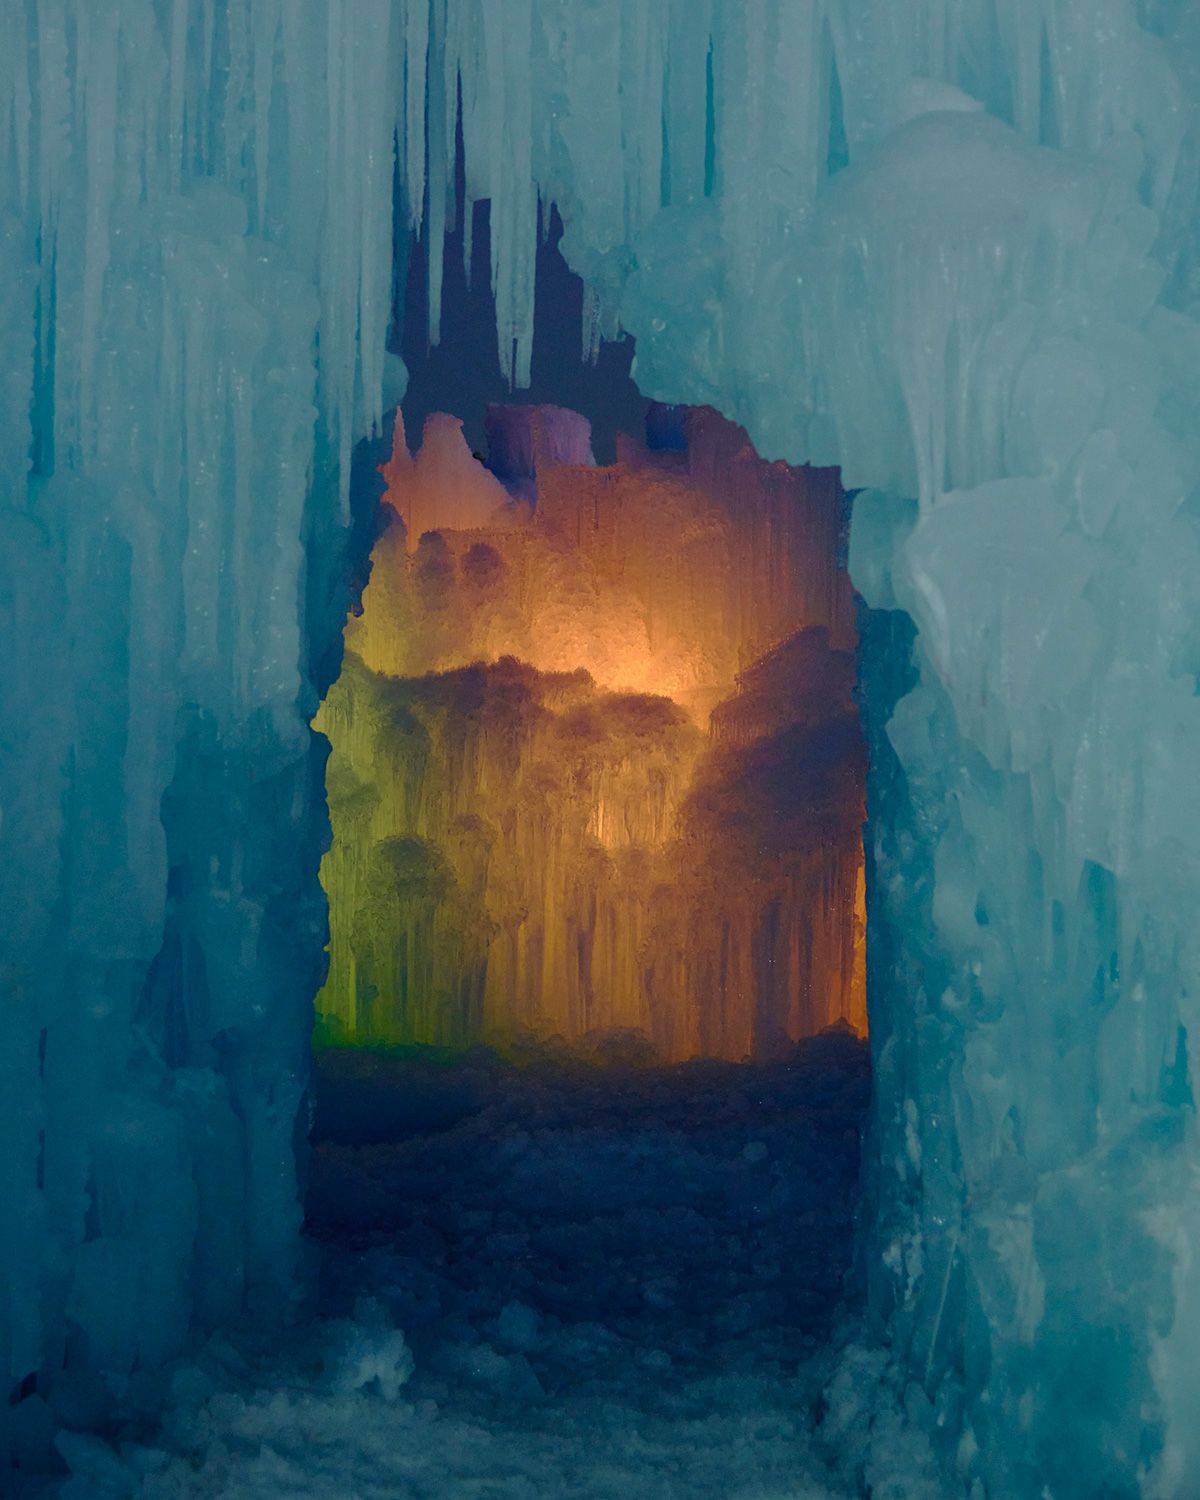 Castles of Ice: splendid sculpture and photography series by Frankie Carino